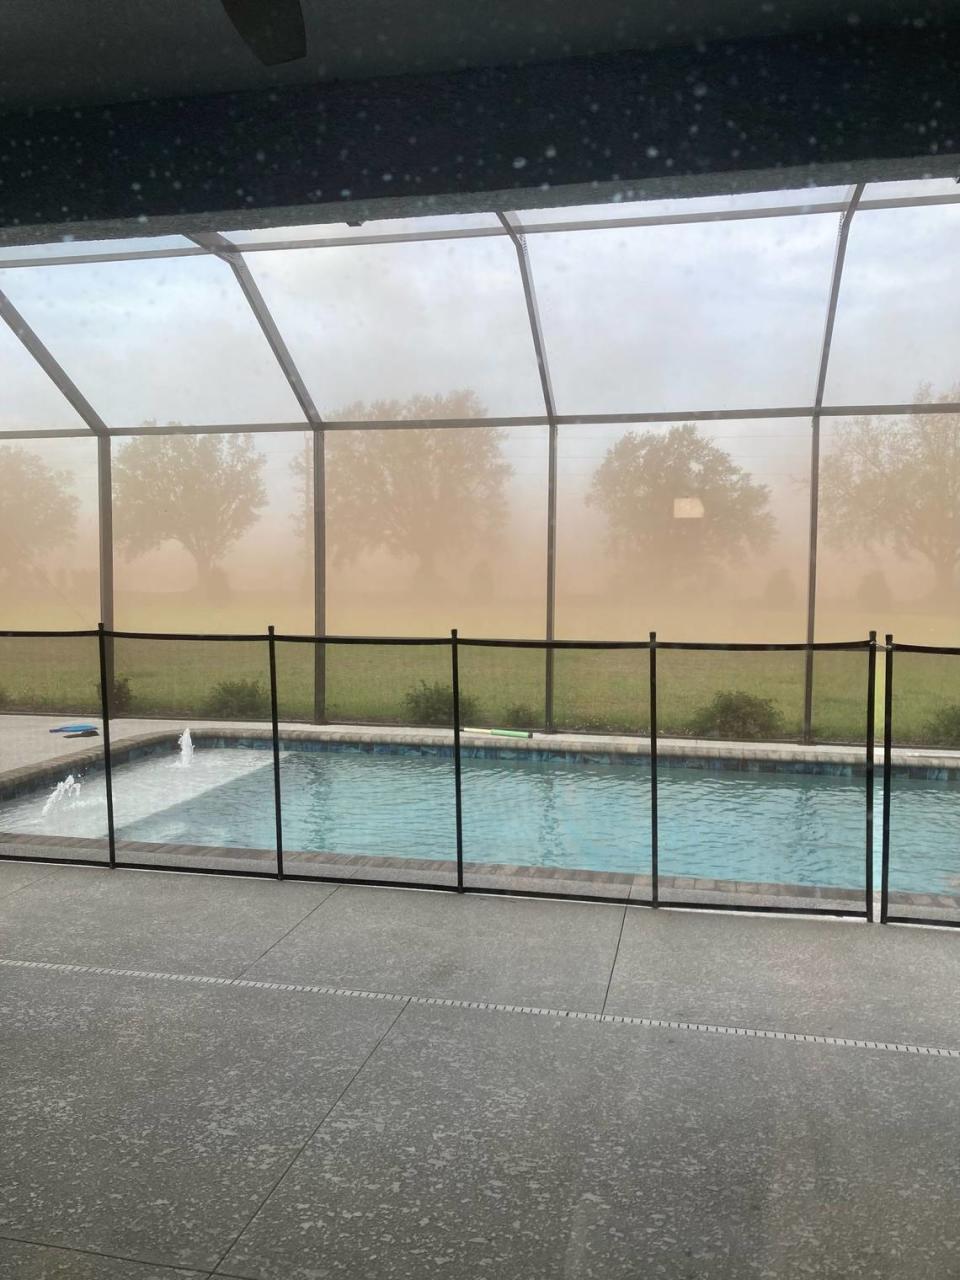 Foxbrook residents said dust from the Rye Ranch construction site is covering their homes. A provided photo shows dust blowing through the air in a neighbor’s backyard.